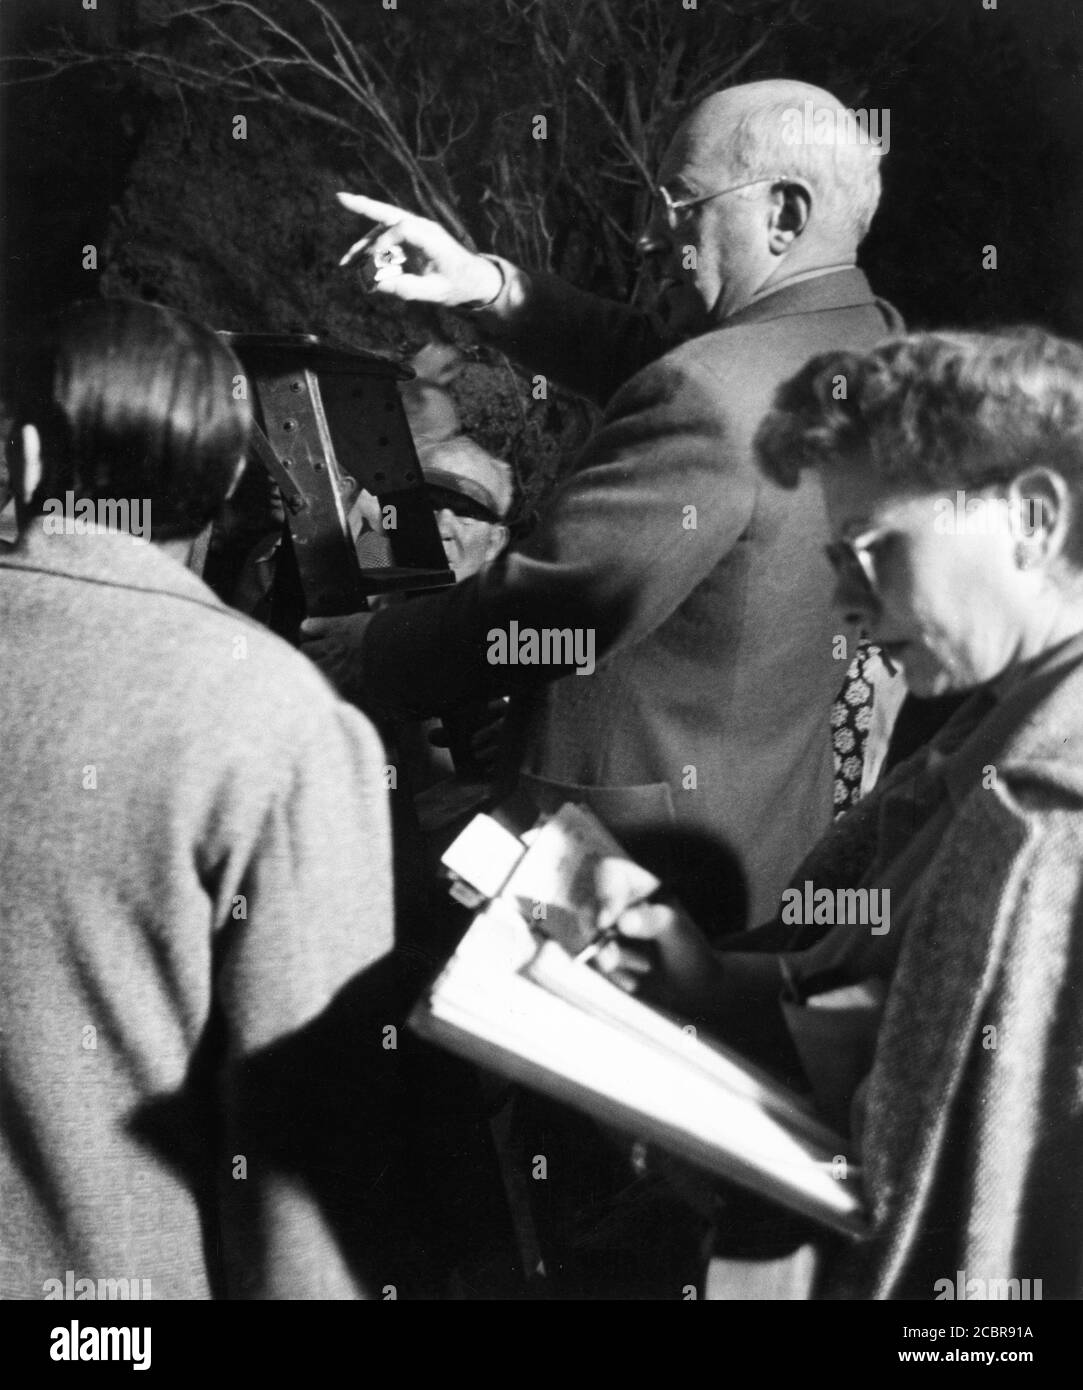 CECIL B. DeMILLE on set candid with Cinematographer GEORGE BARNES (back to camera at left) and Script Supervisor CLAIRE BEHNKE during filming of SAMSON AND DELILAH 1949 director CECIL B. DeMILLE Paramount Pictures Stock Photo